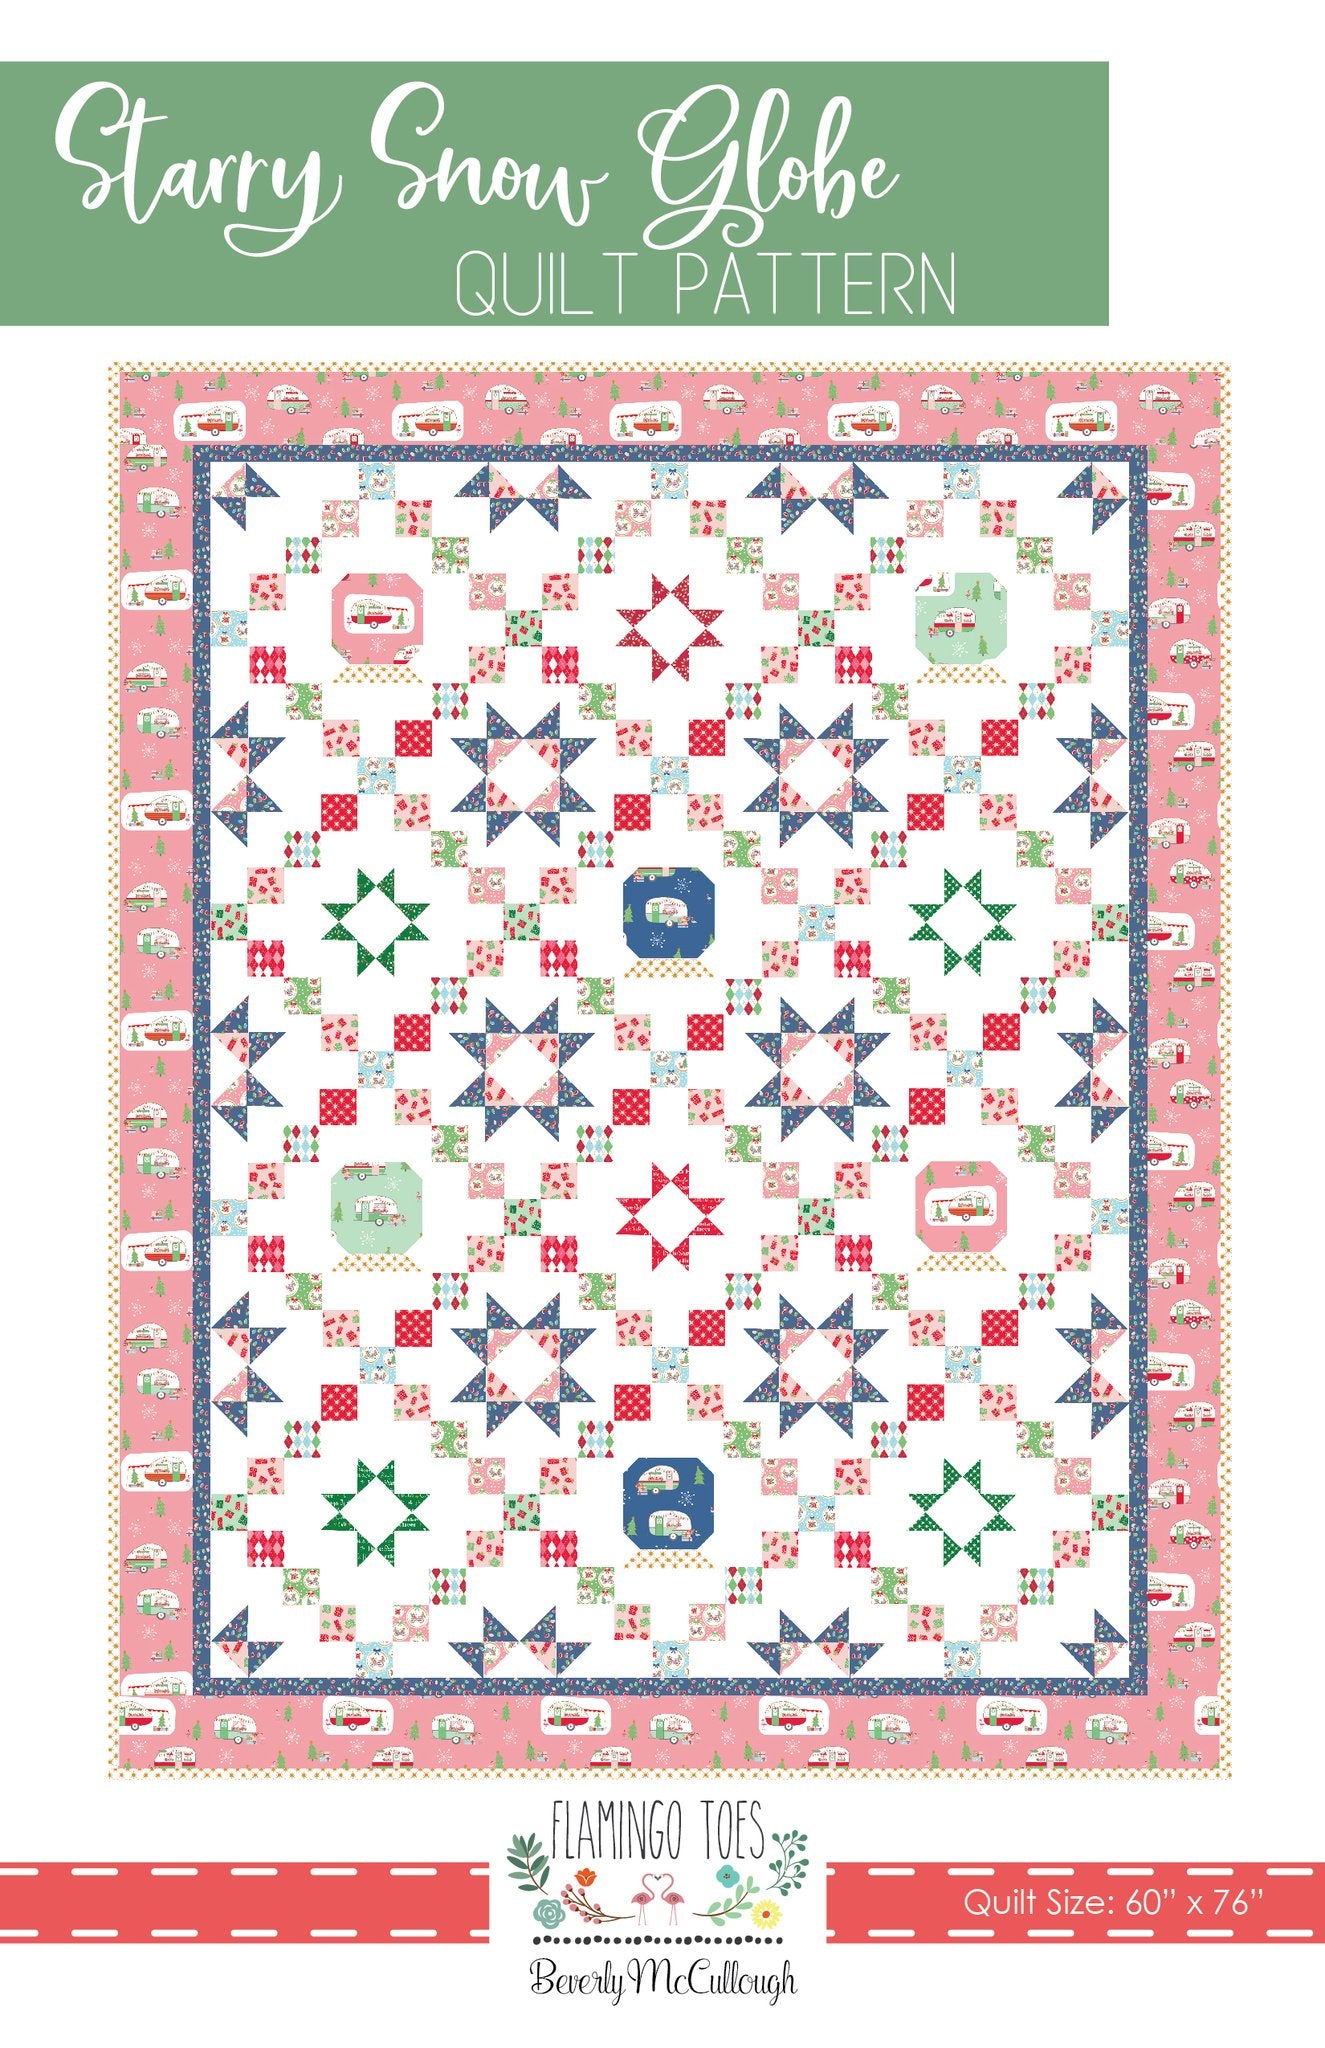 PATTERN, STARRY SNOW GLOBE Quilt by Beverly McCullough of Flamingo Toes